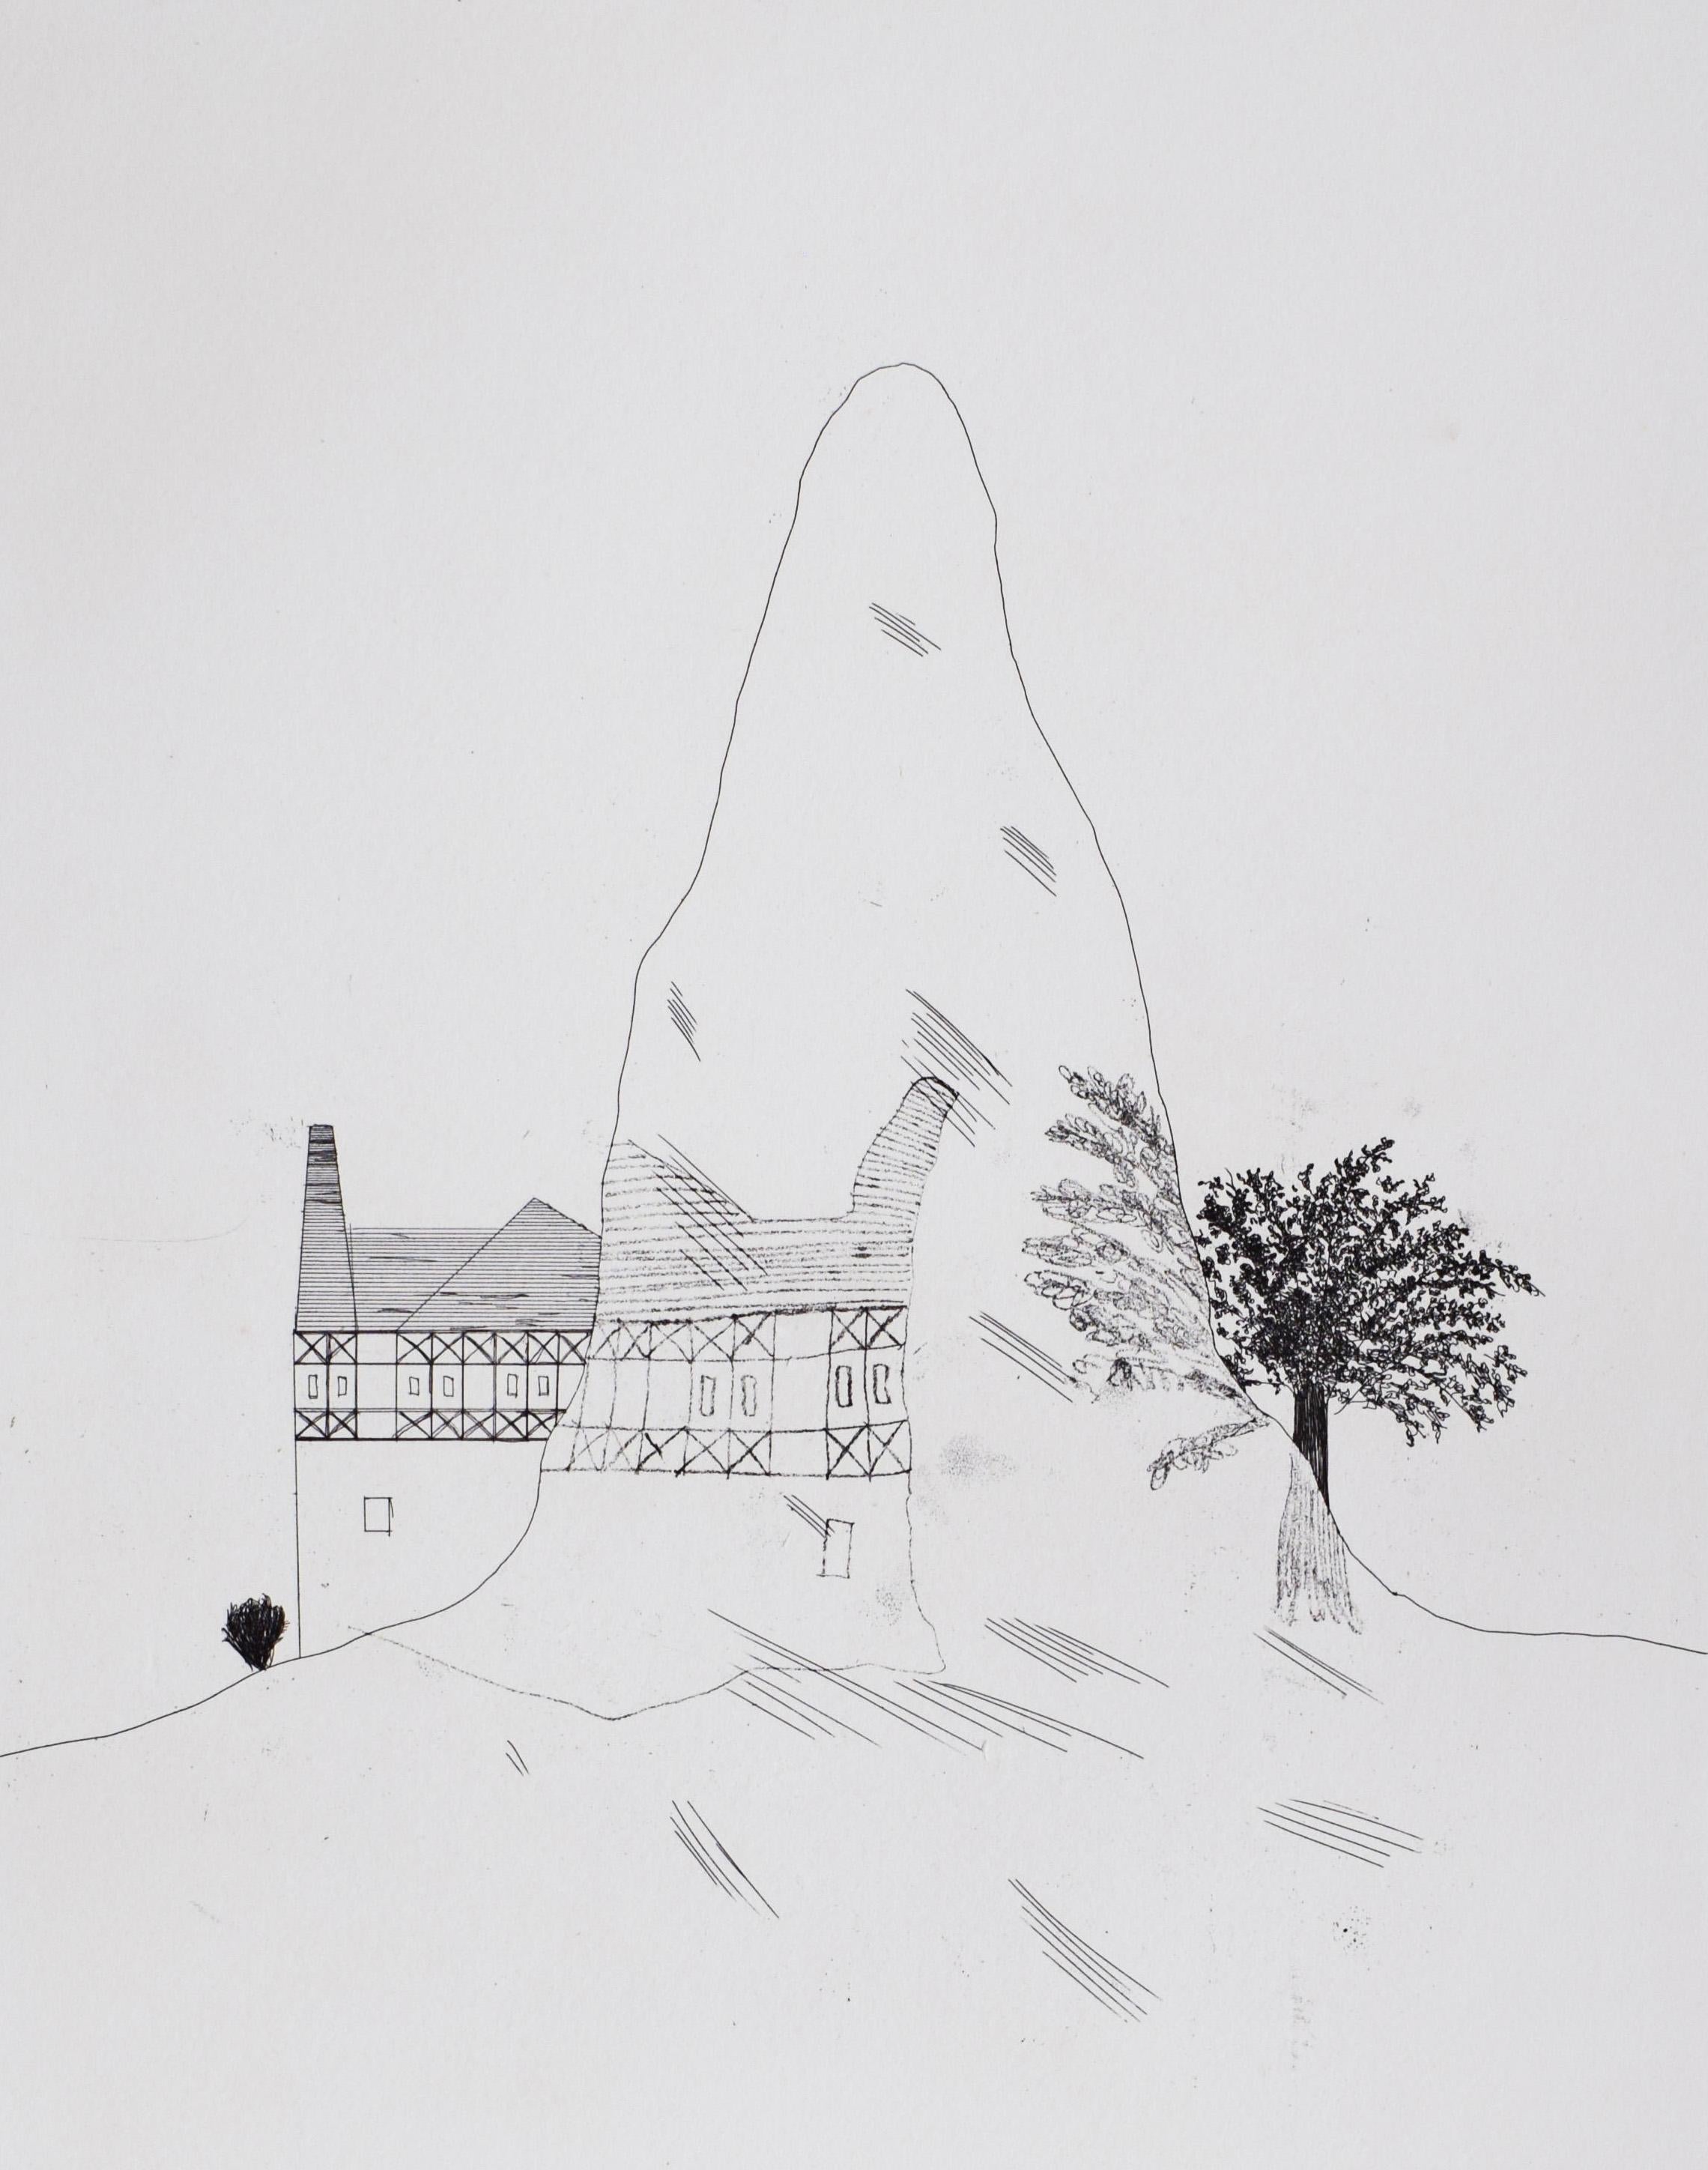 David Hockney Landscape Print – The Glass Mountain (Old Rinkrank), von: Six Fairy Tales from the Brothers Grimm